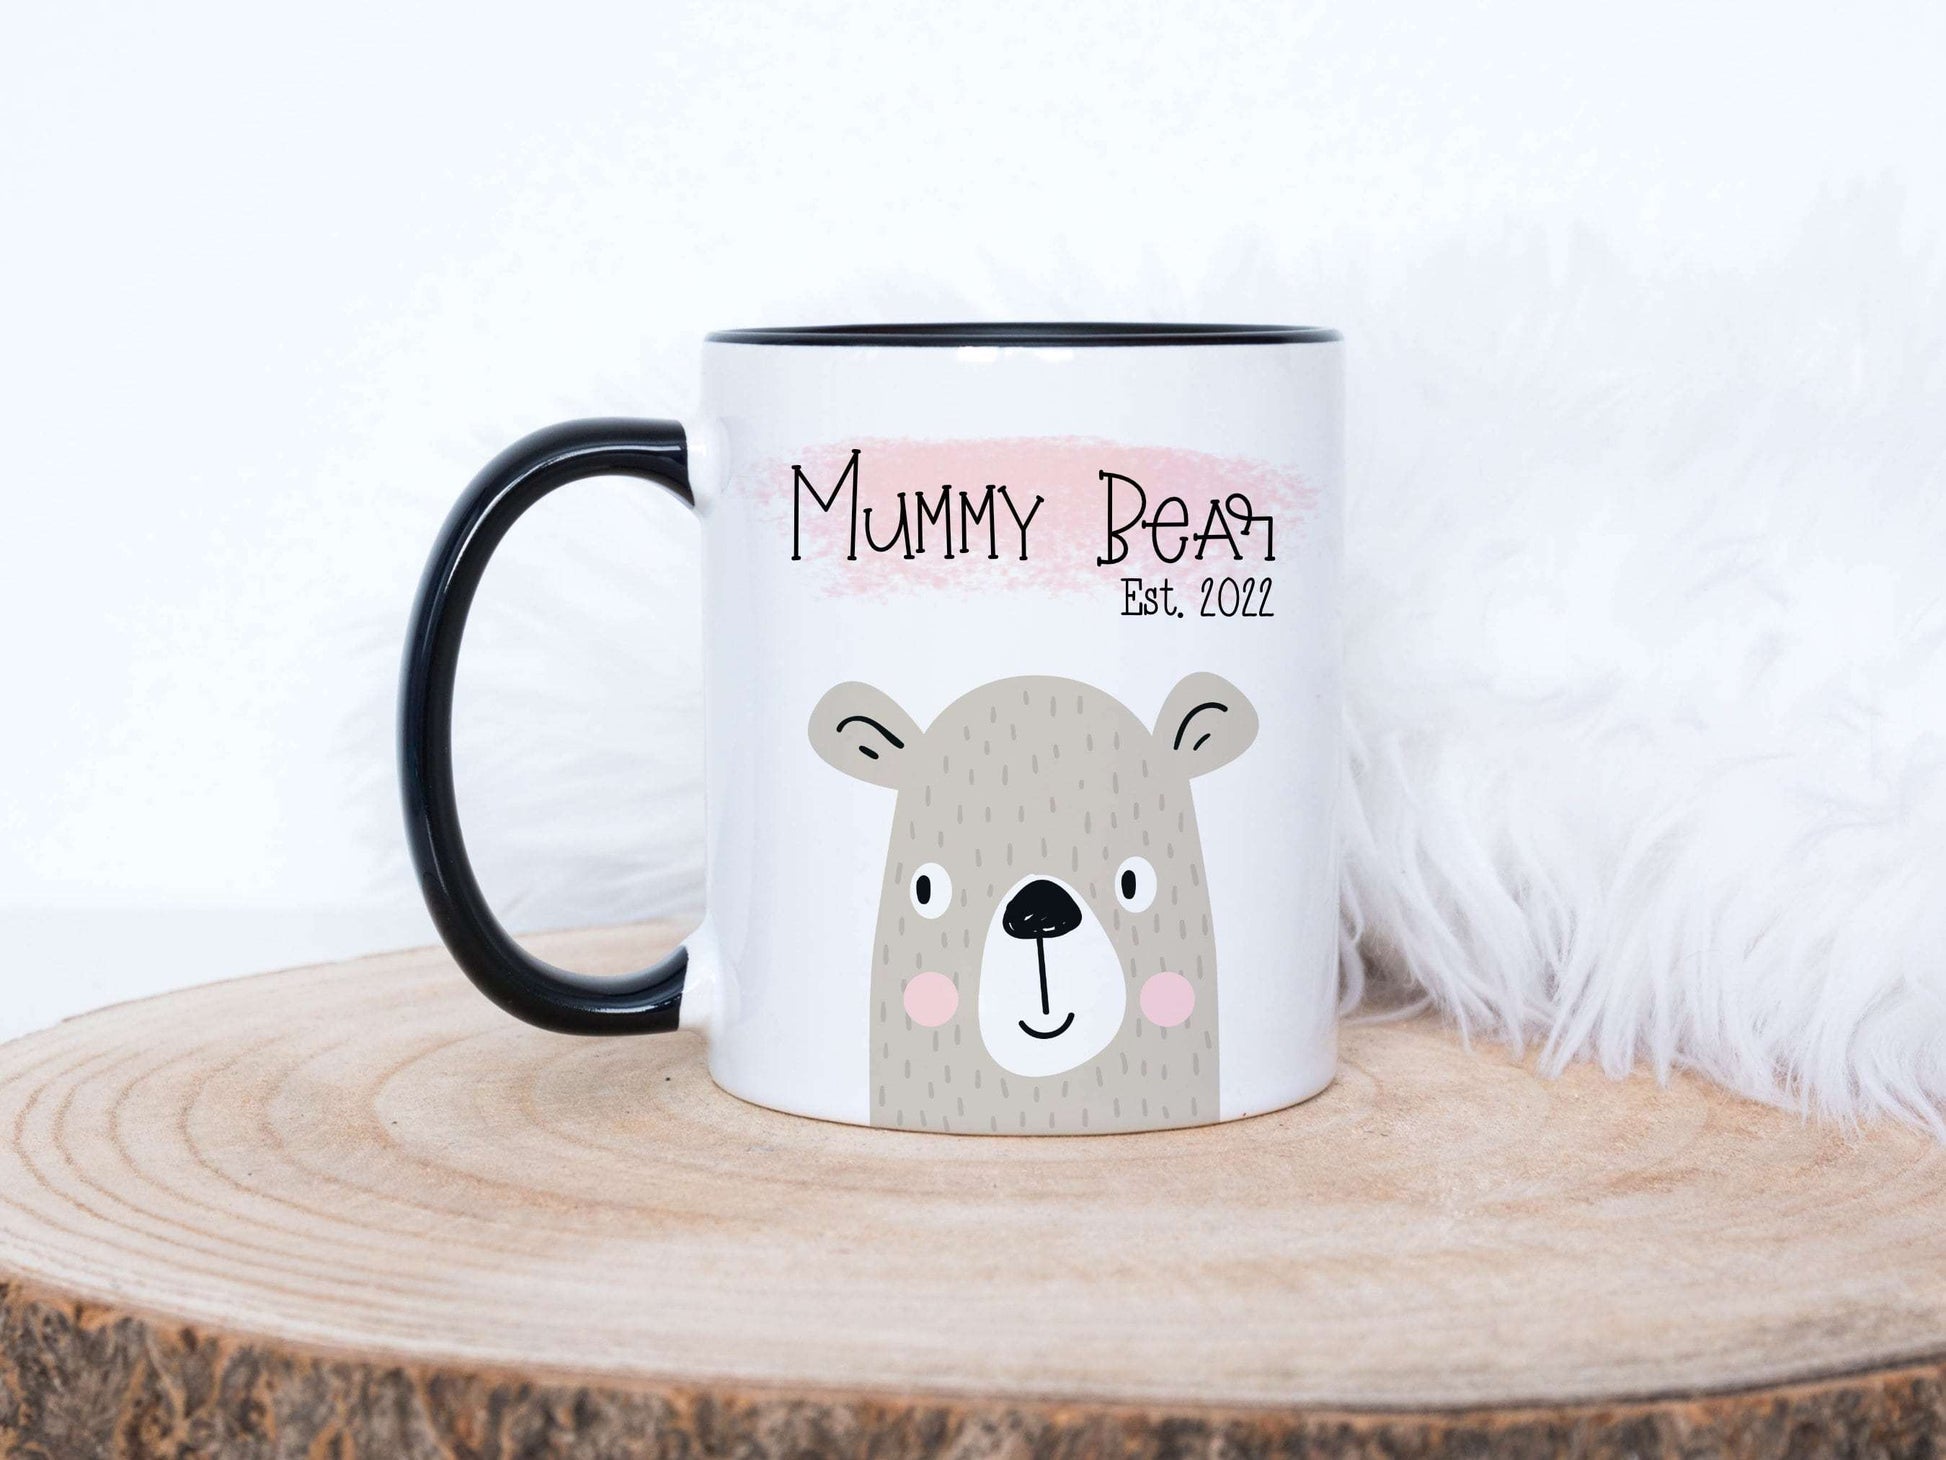 mummy bear design printed on a white mug with black handle. The mug is sitting on a wood slice in front of a white fluffy background